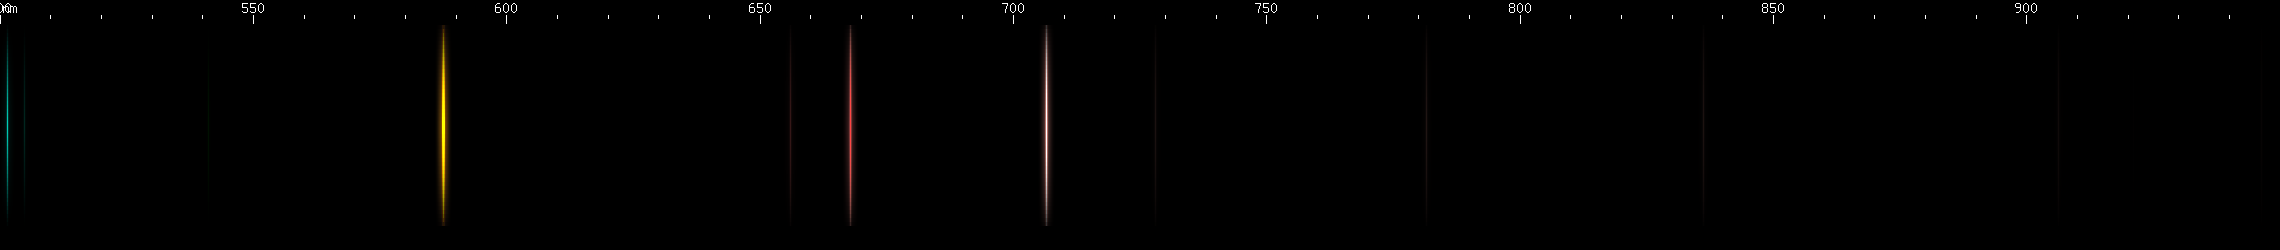 Spectral lines of Helium.